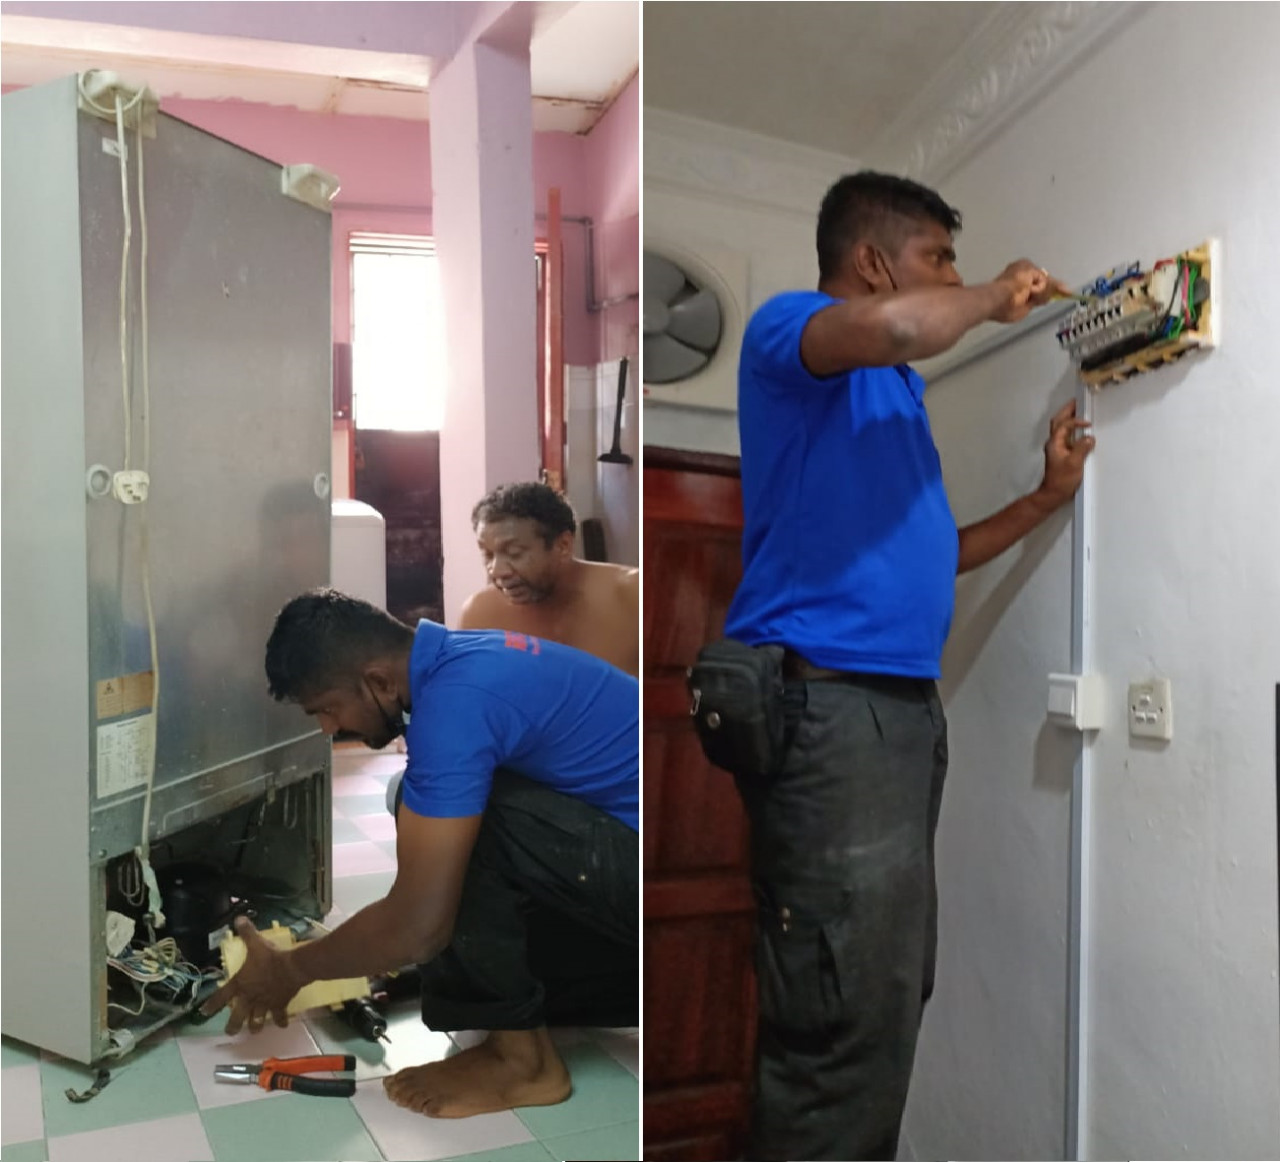 P. Puvaneswaran visits between 15 to 20 houses a day, offering free electrical repairs and wiring services to the flood victims in need. – Pics courtesy of P. Puvaneswaran, December 29, 2021